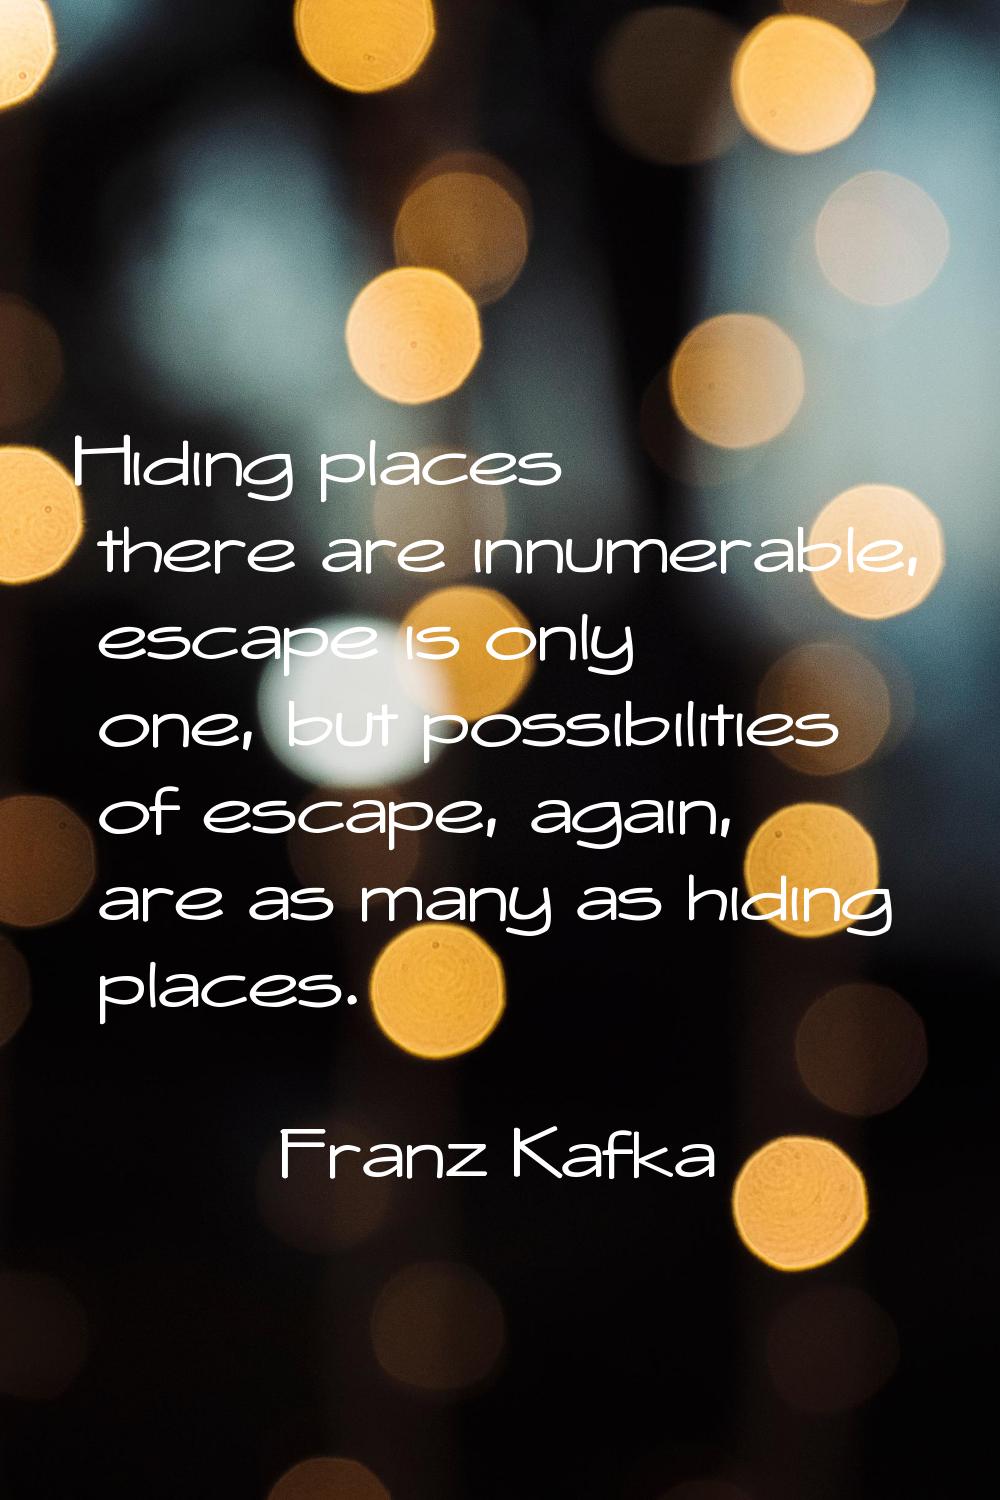 Hiding places there are innumerable, escape is only one, but possibilities of escape, again, are as